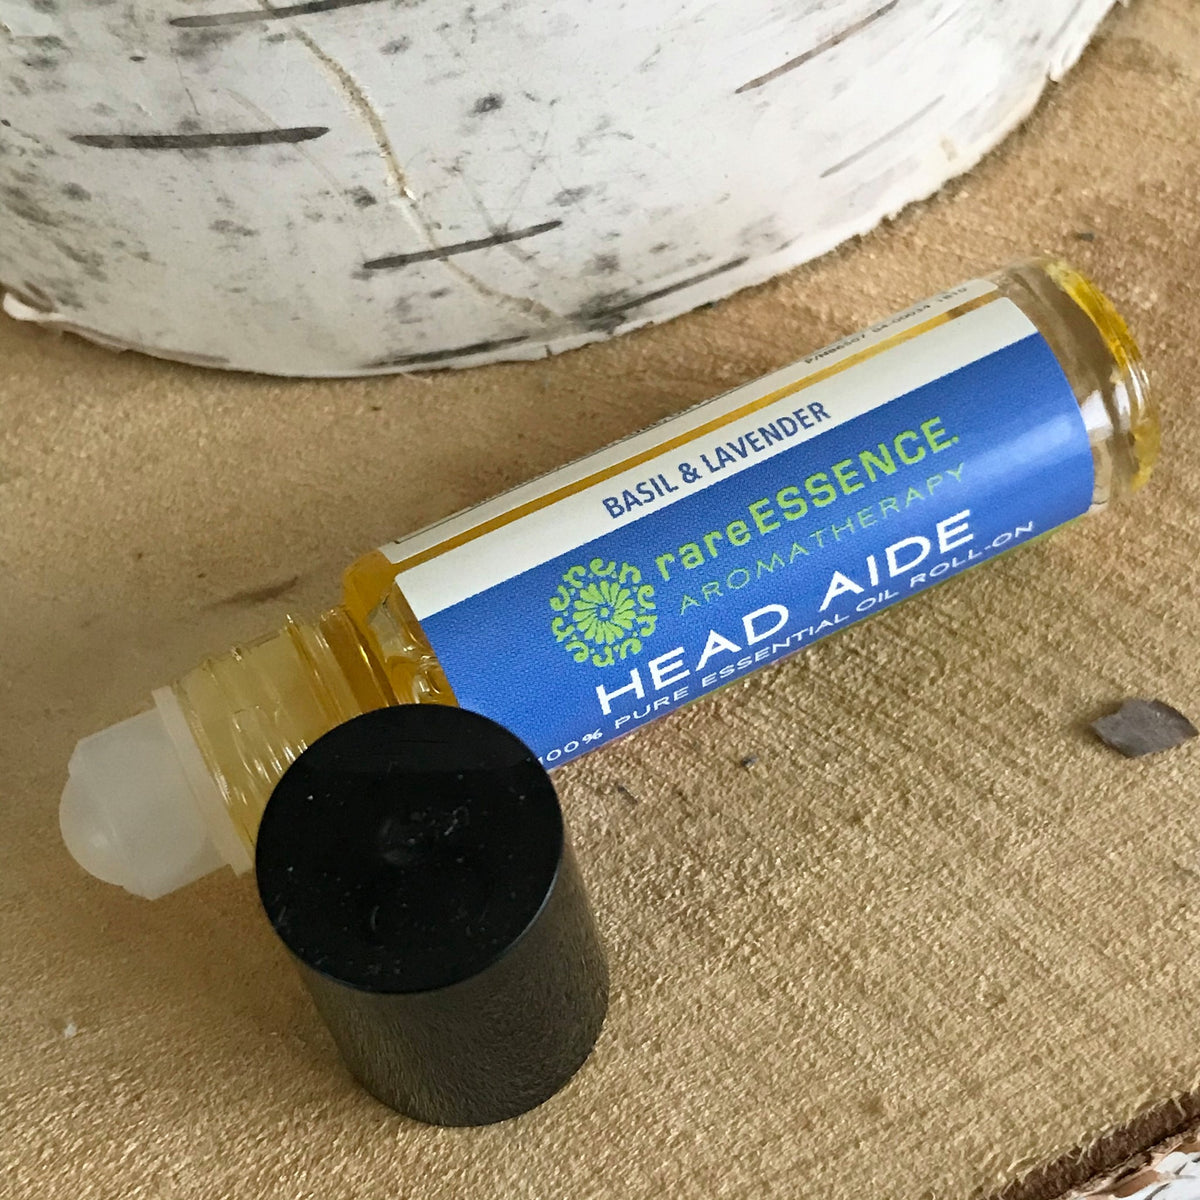 Chamomile, lavender, peppermint, and basil essential oils are some of the ingredients in this roll-on that help calm and fight off headaches and nausea.